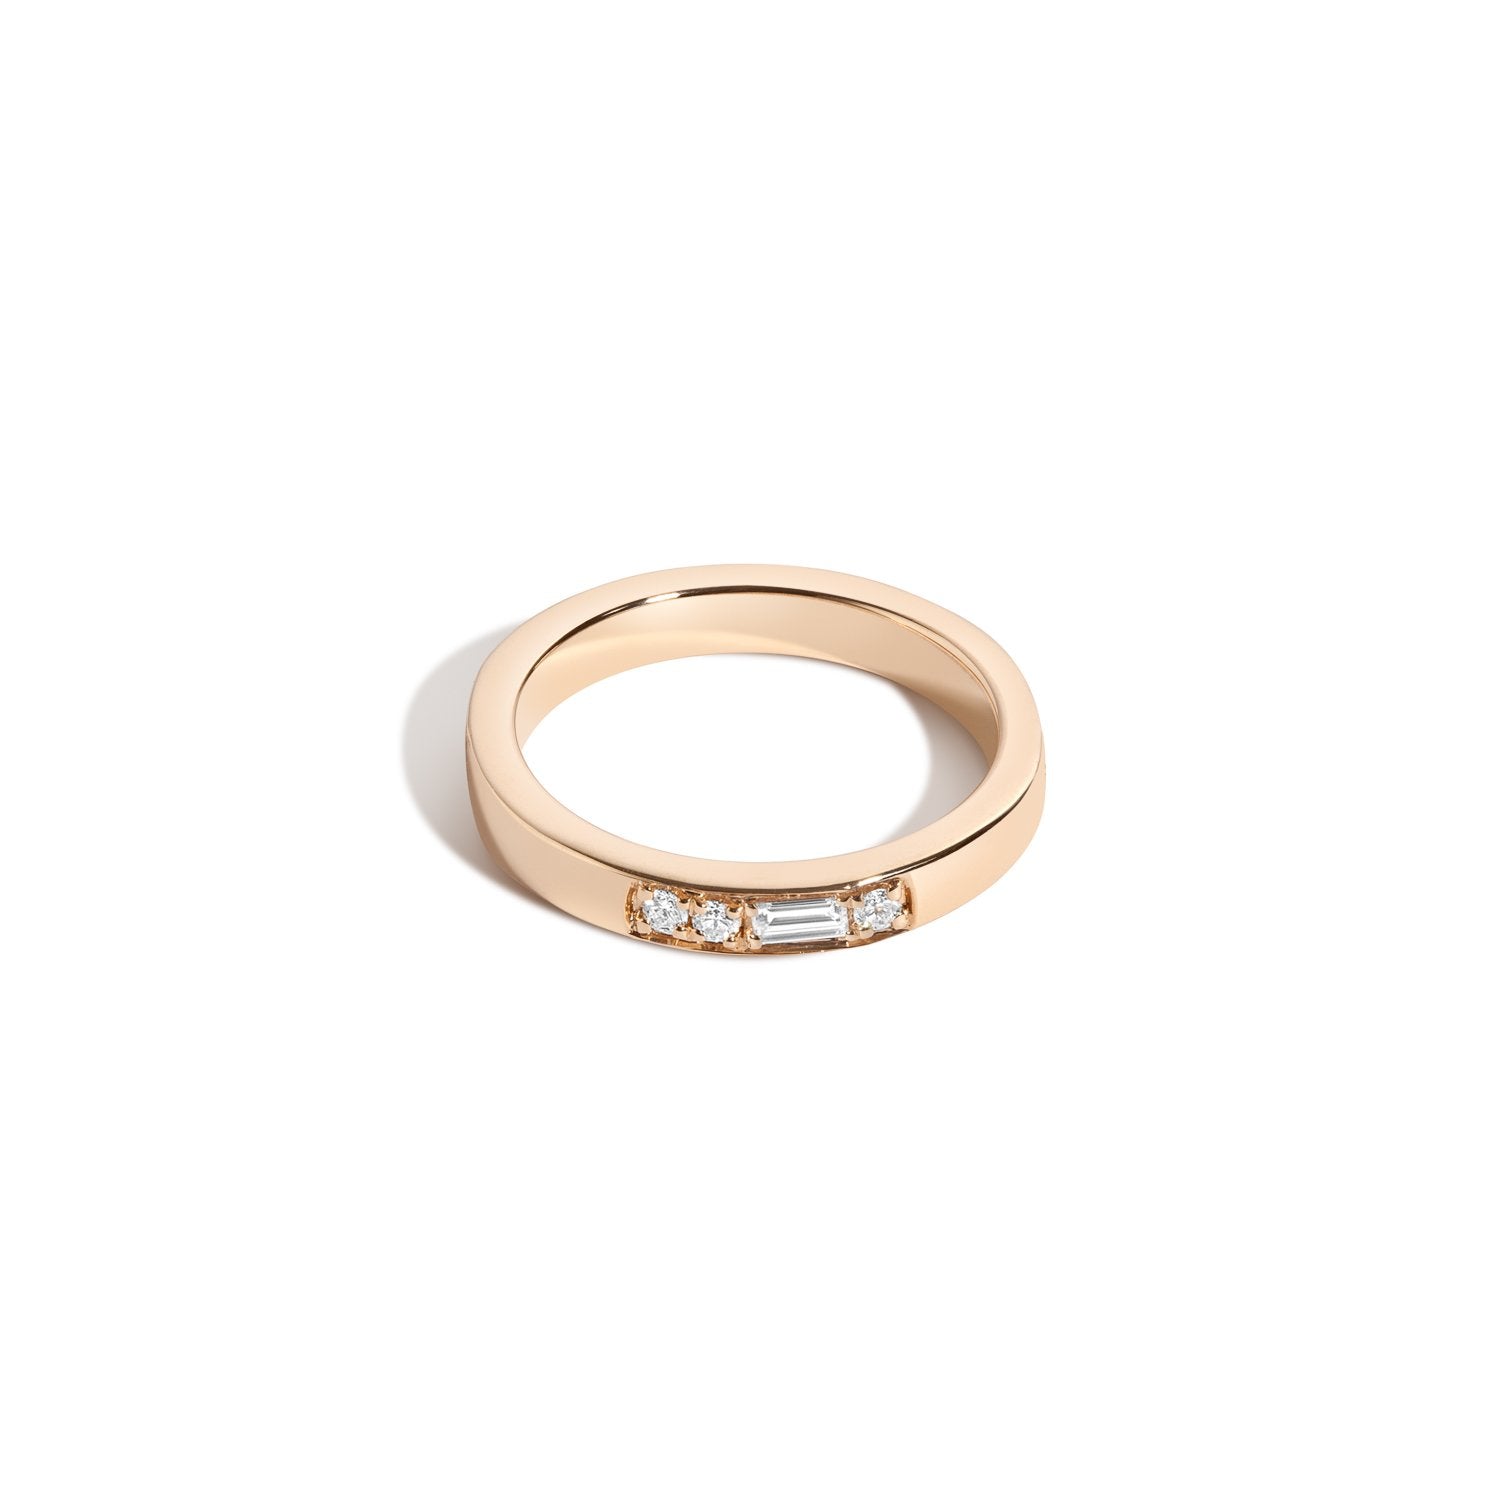 Shahla Karimi Jewelry Morse Code Series Ring 14K Yellow Gold - Letter "F"